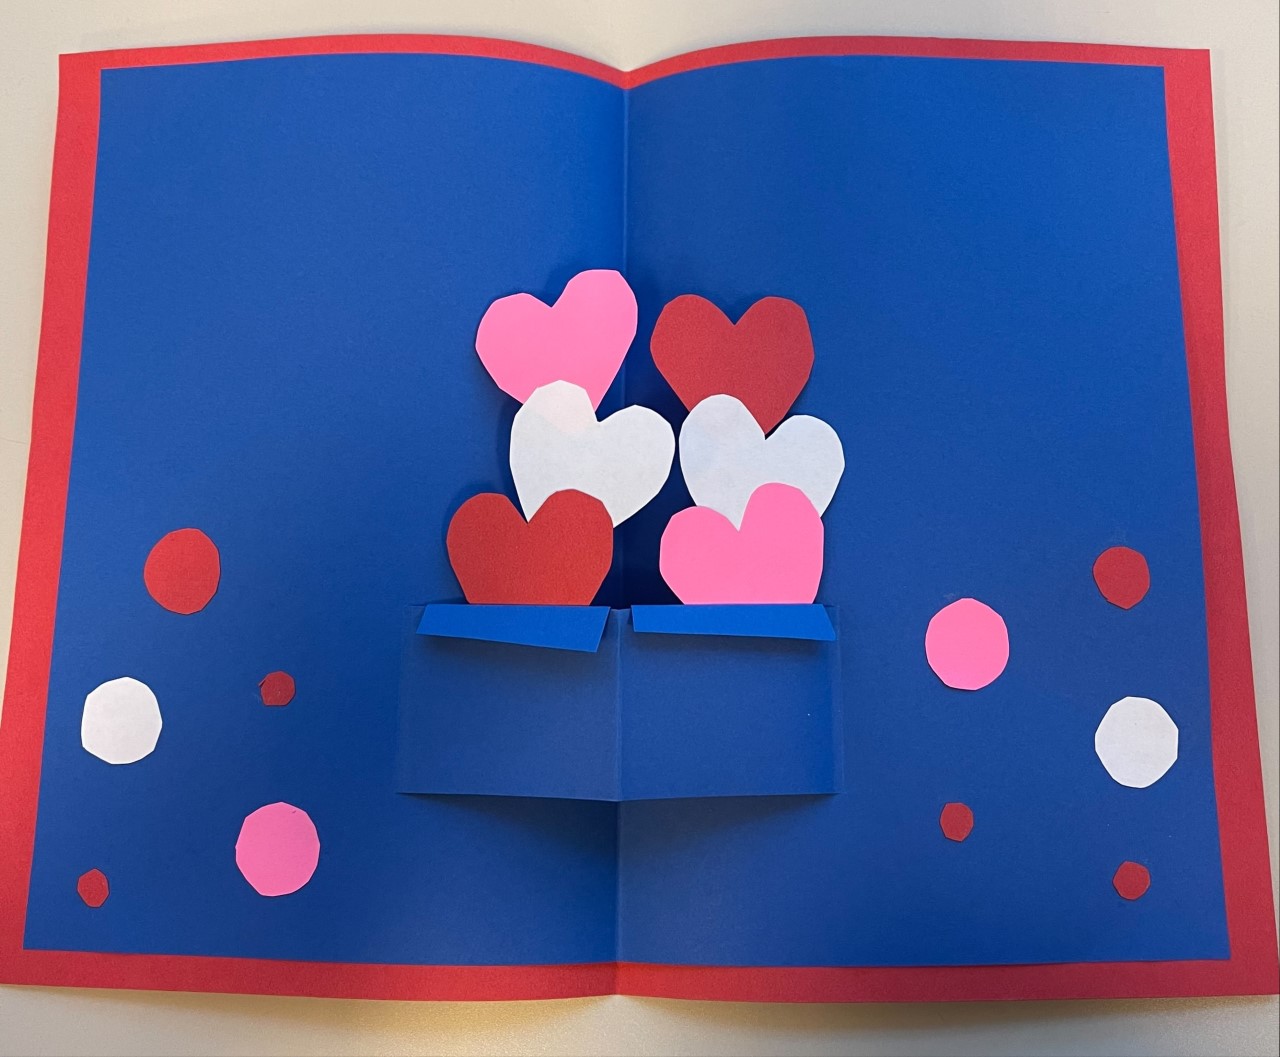 The card's design features hearts exploding from a box.